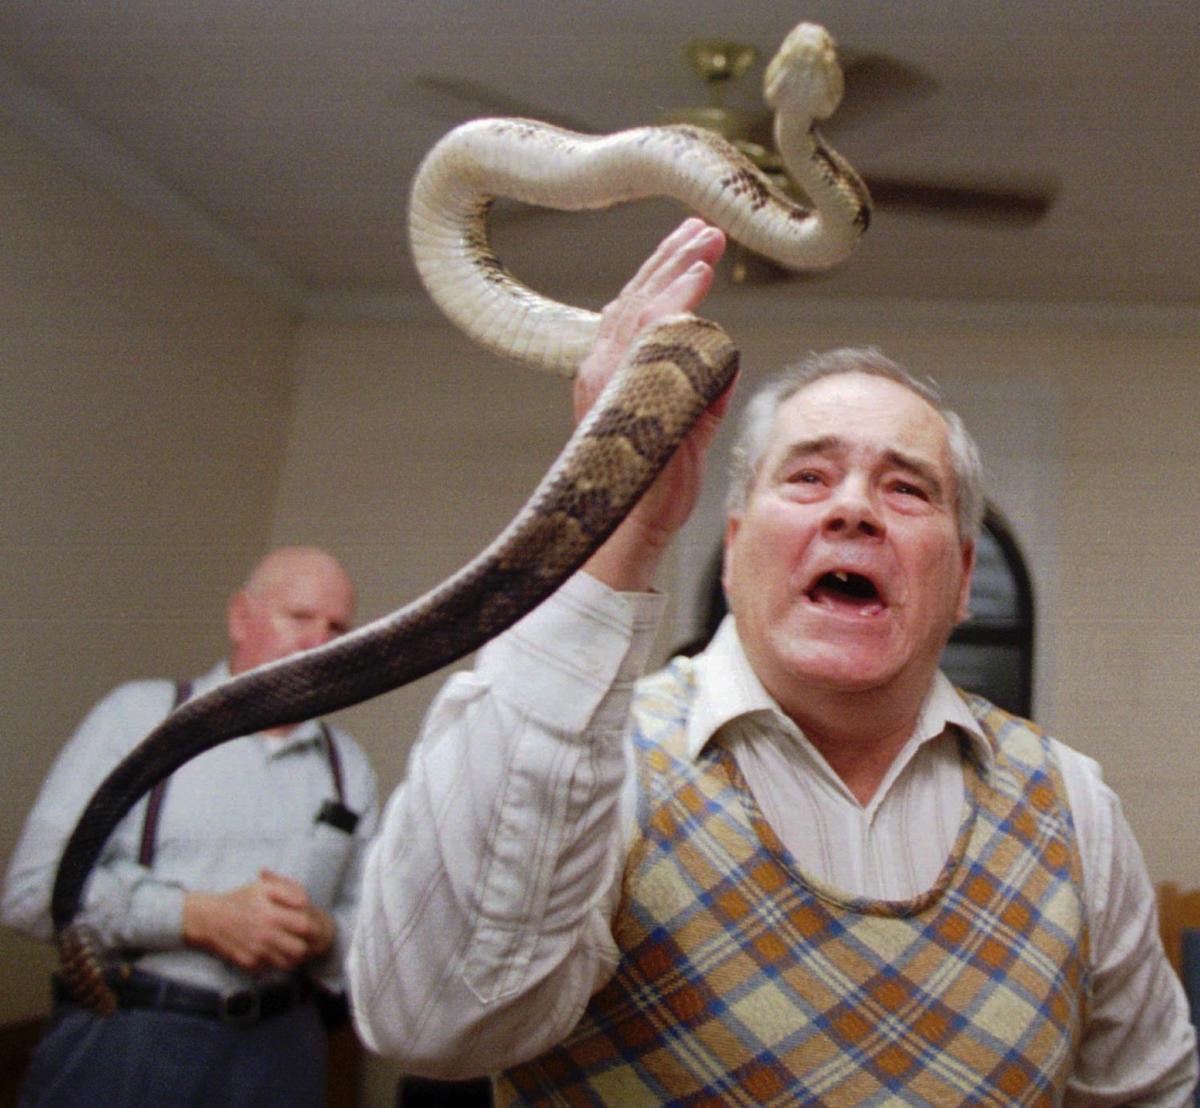 I’m going to share an interesting tidbit of my life that may help some people understand my (seeming) hyperbole, but hear me out. I was raised by a cult, and one practice was snake-handling. Yes, you read that right. Why snake-handle? 1/x